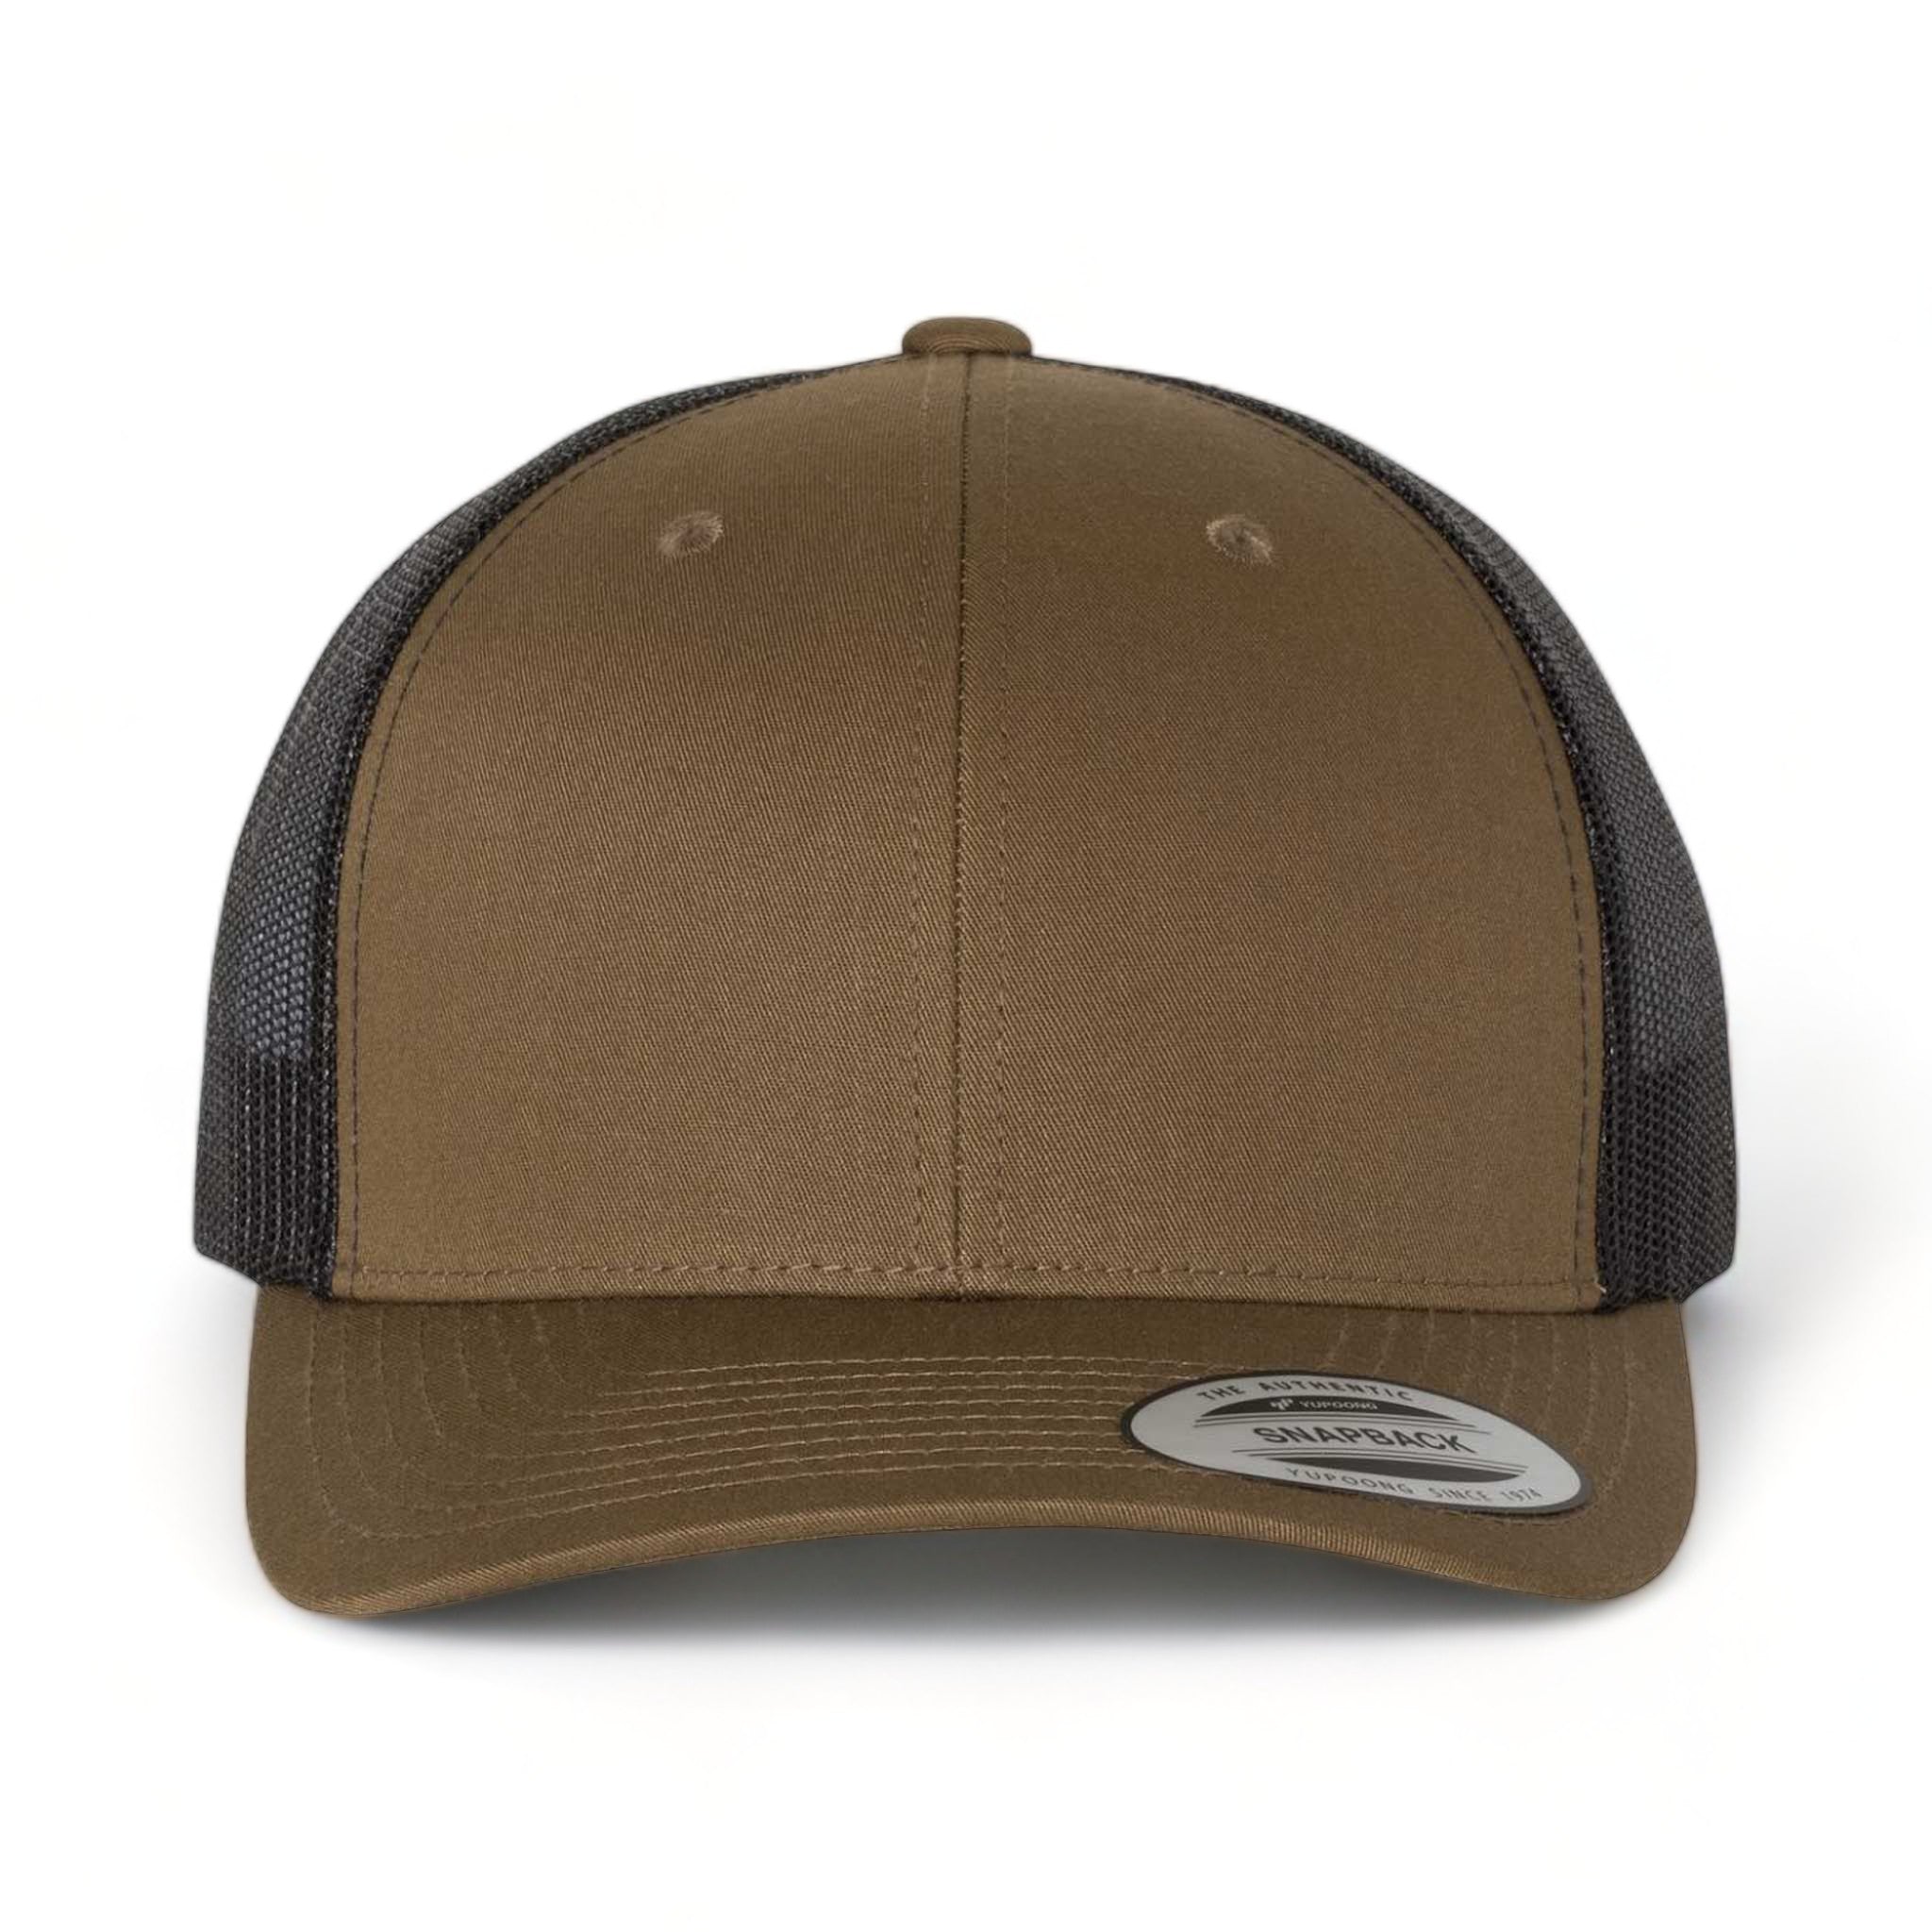 Front view of YP Classics 6606 custom hat in coyote brown and black